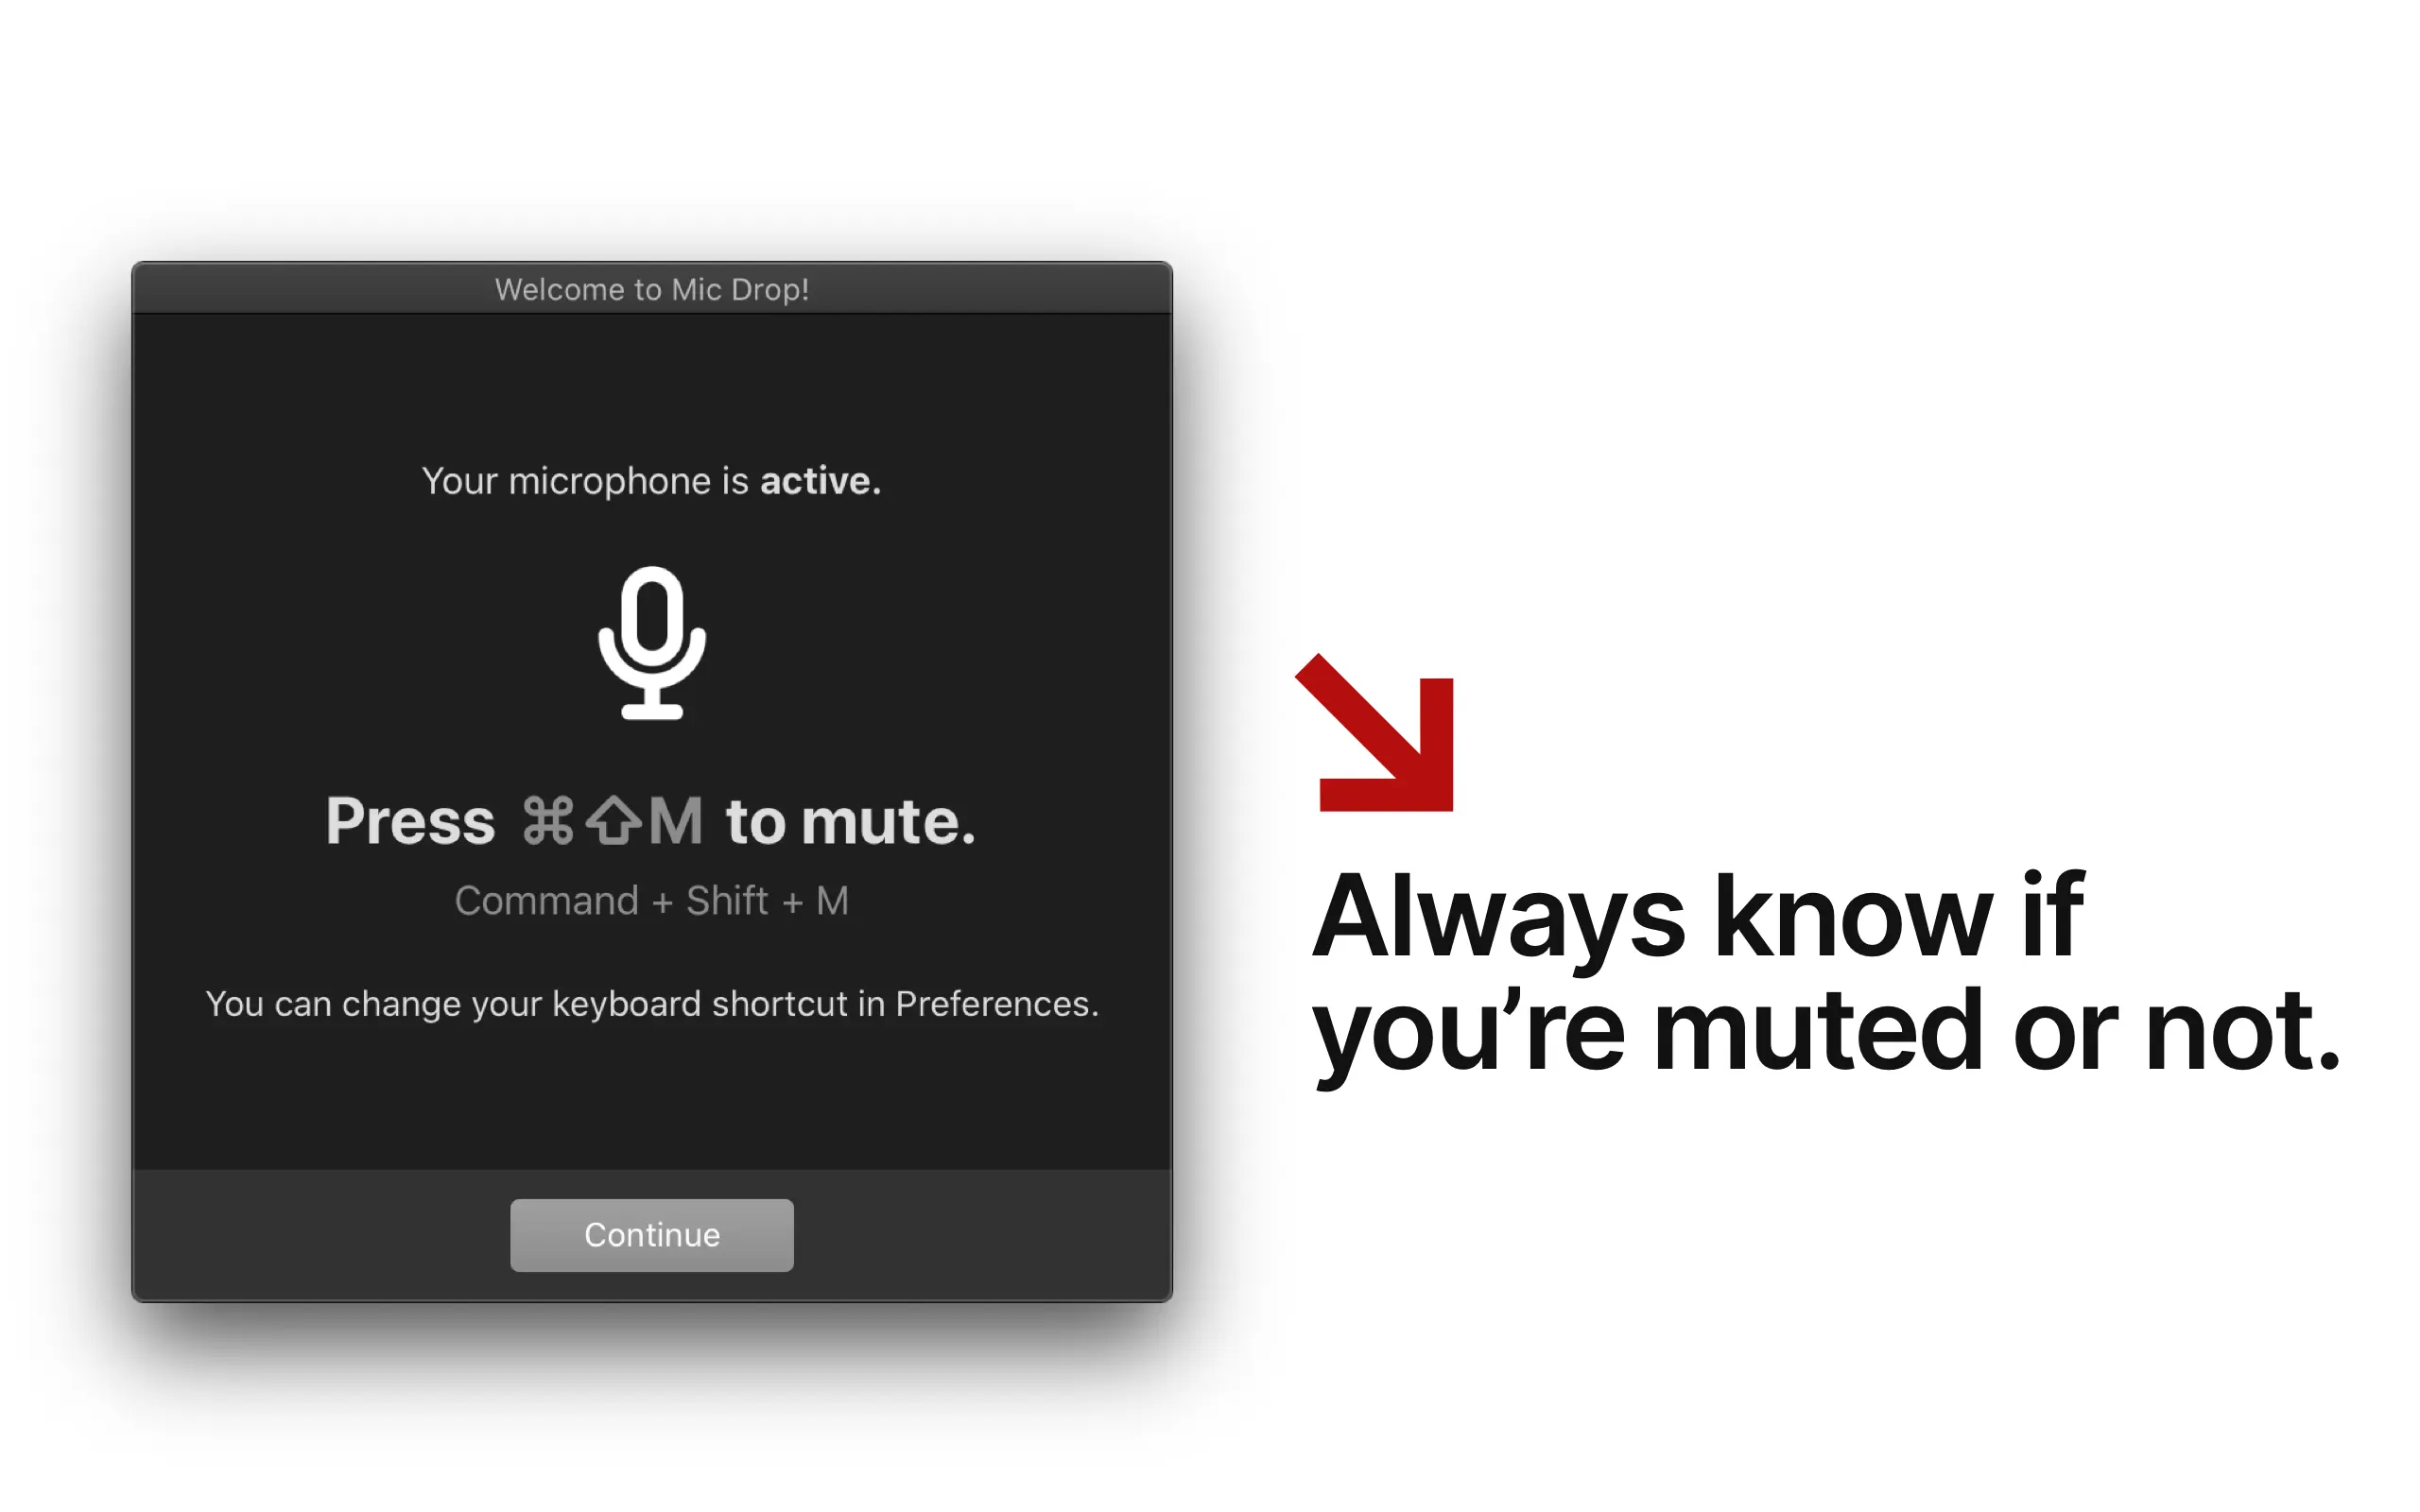 Mic Drop's mute indicator, showing whether you're muted or not.